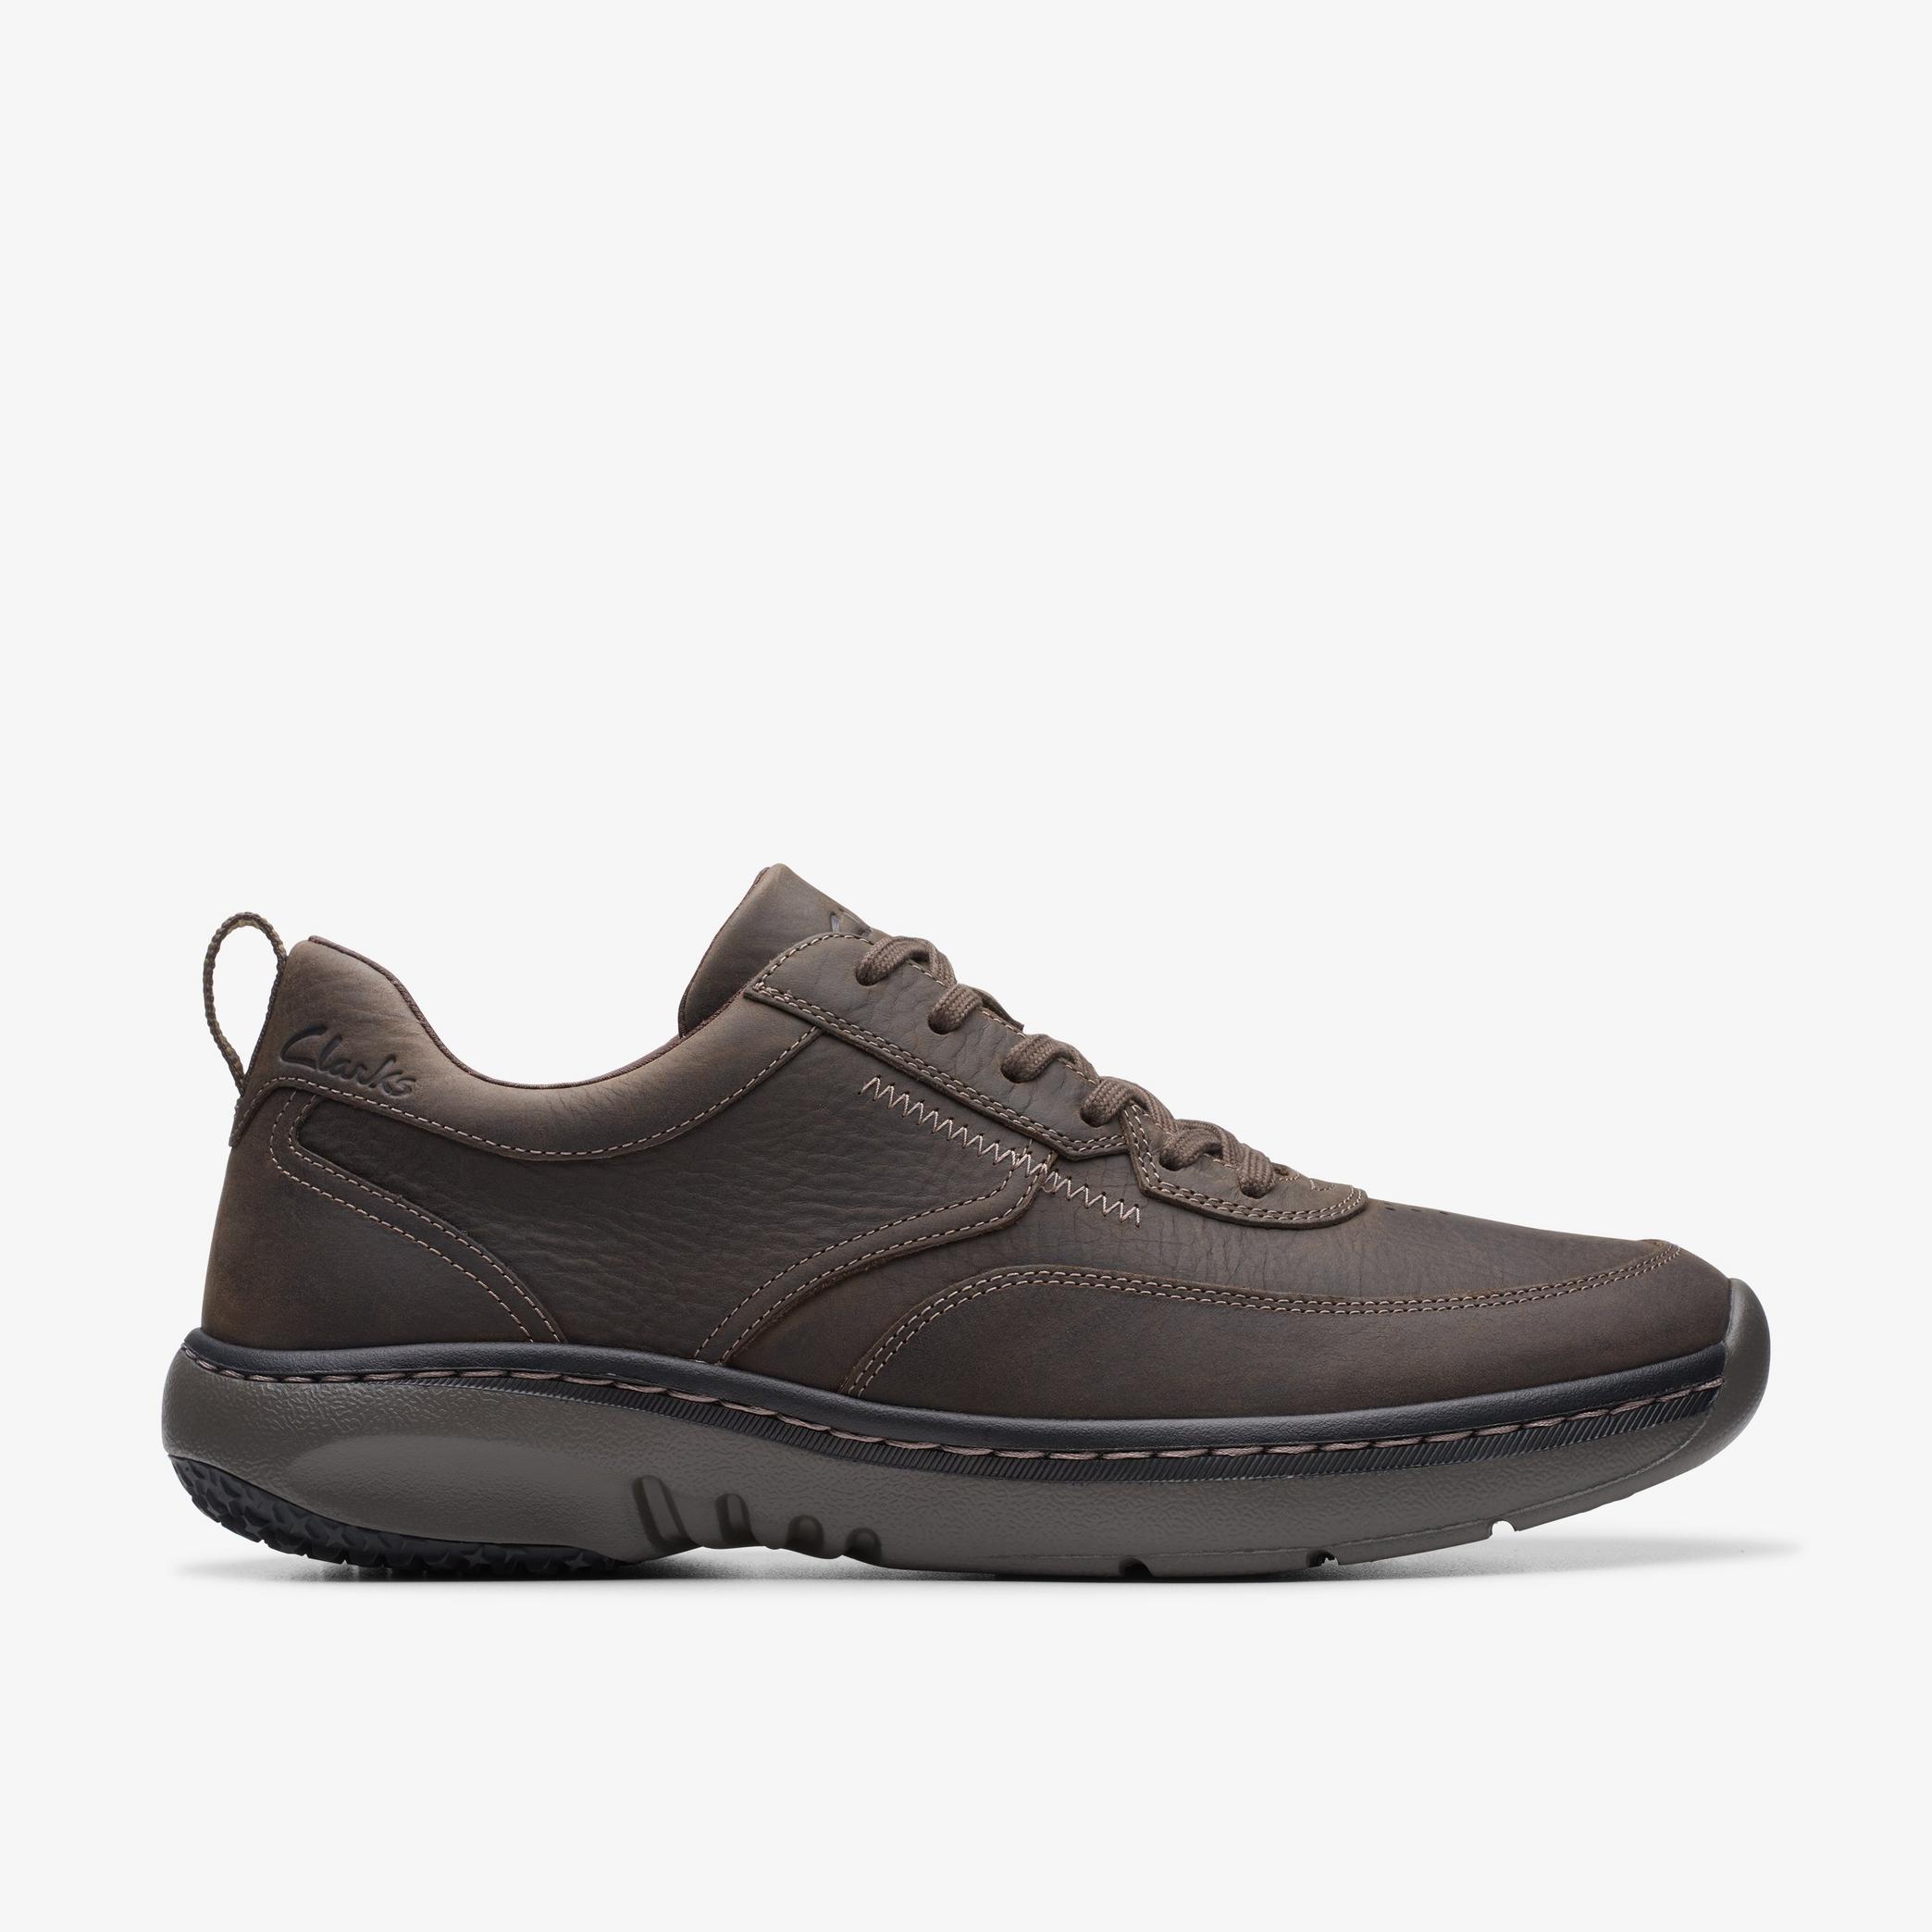 MENS Clarks Pro Lace Dark Brown Tumbled Sneakers | Clarks US